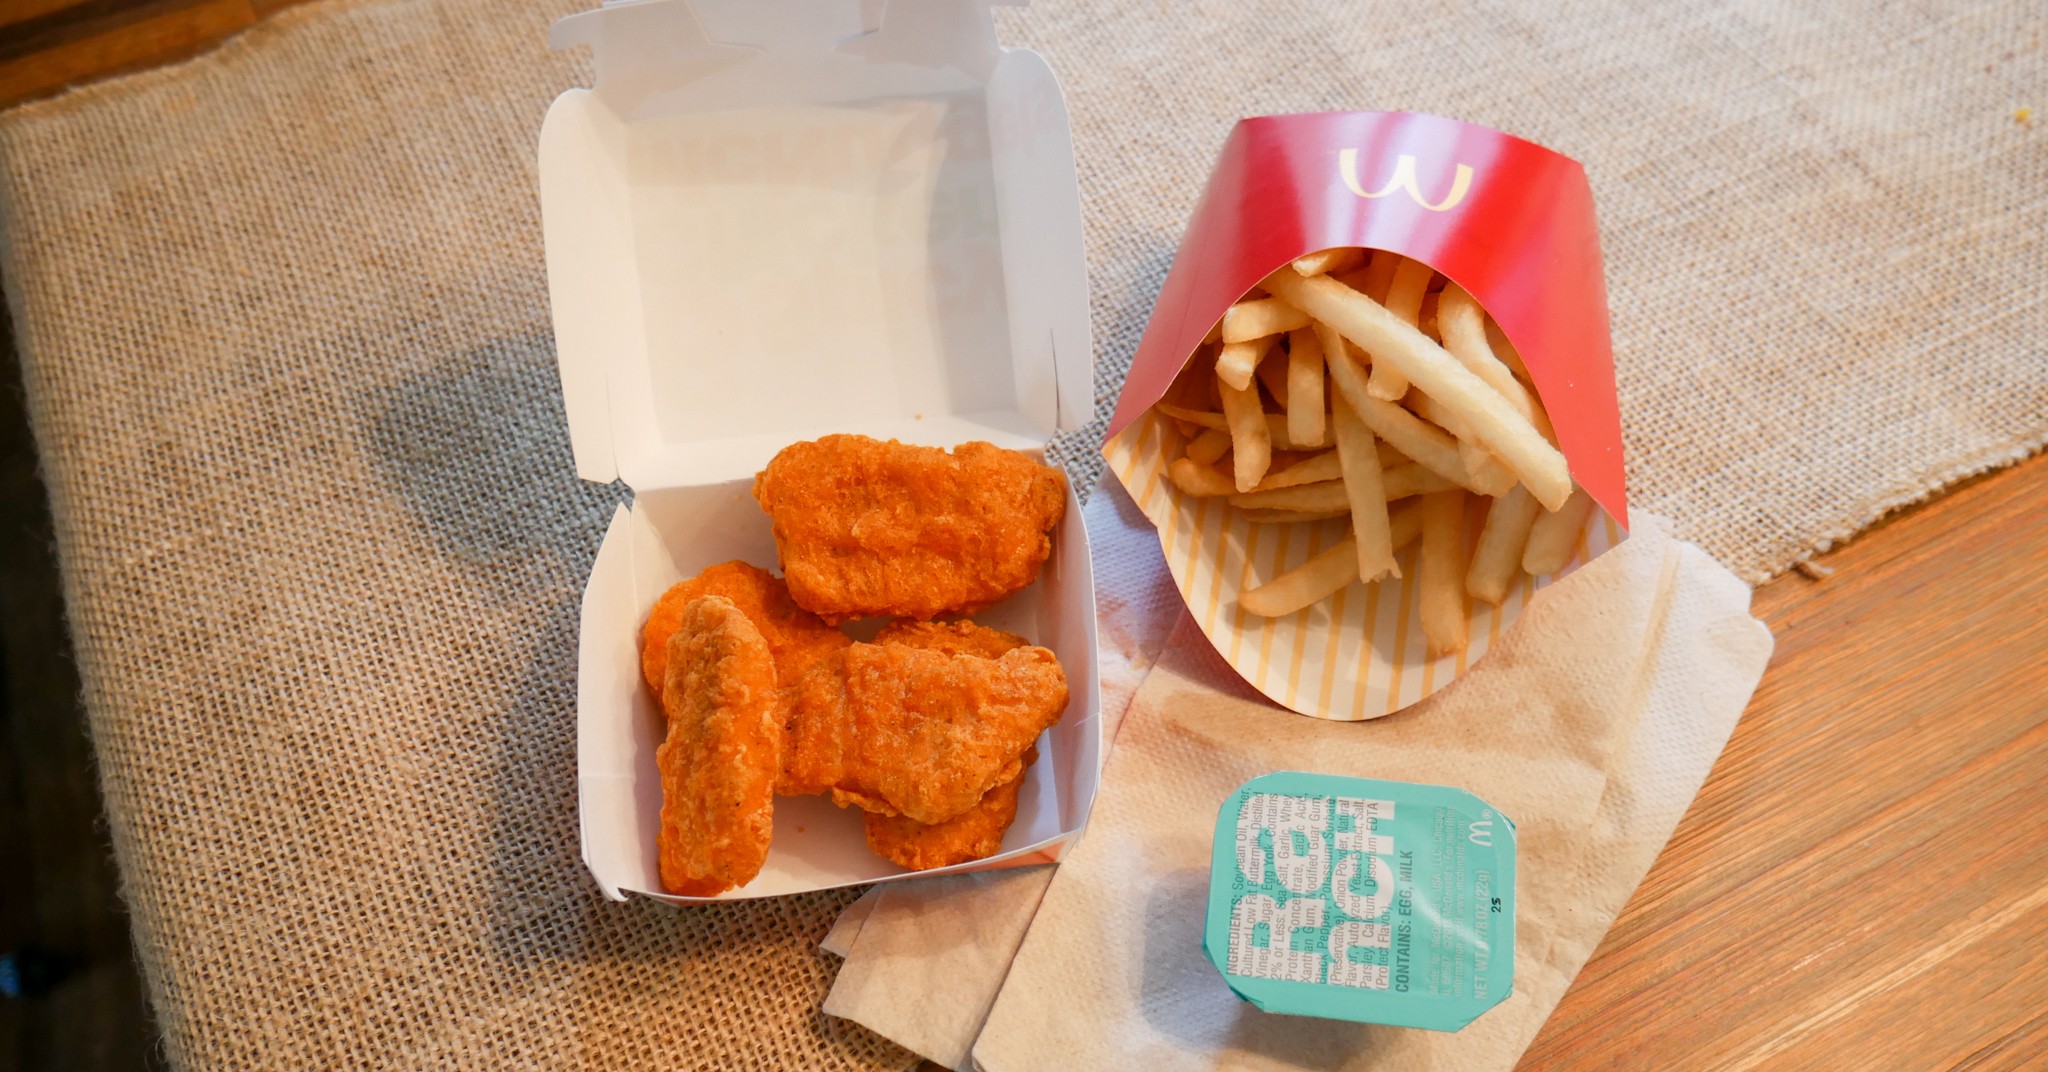 McDonald's vs. Wendy's: Whose Spicy Chicken Nuggets Are Best?